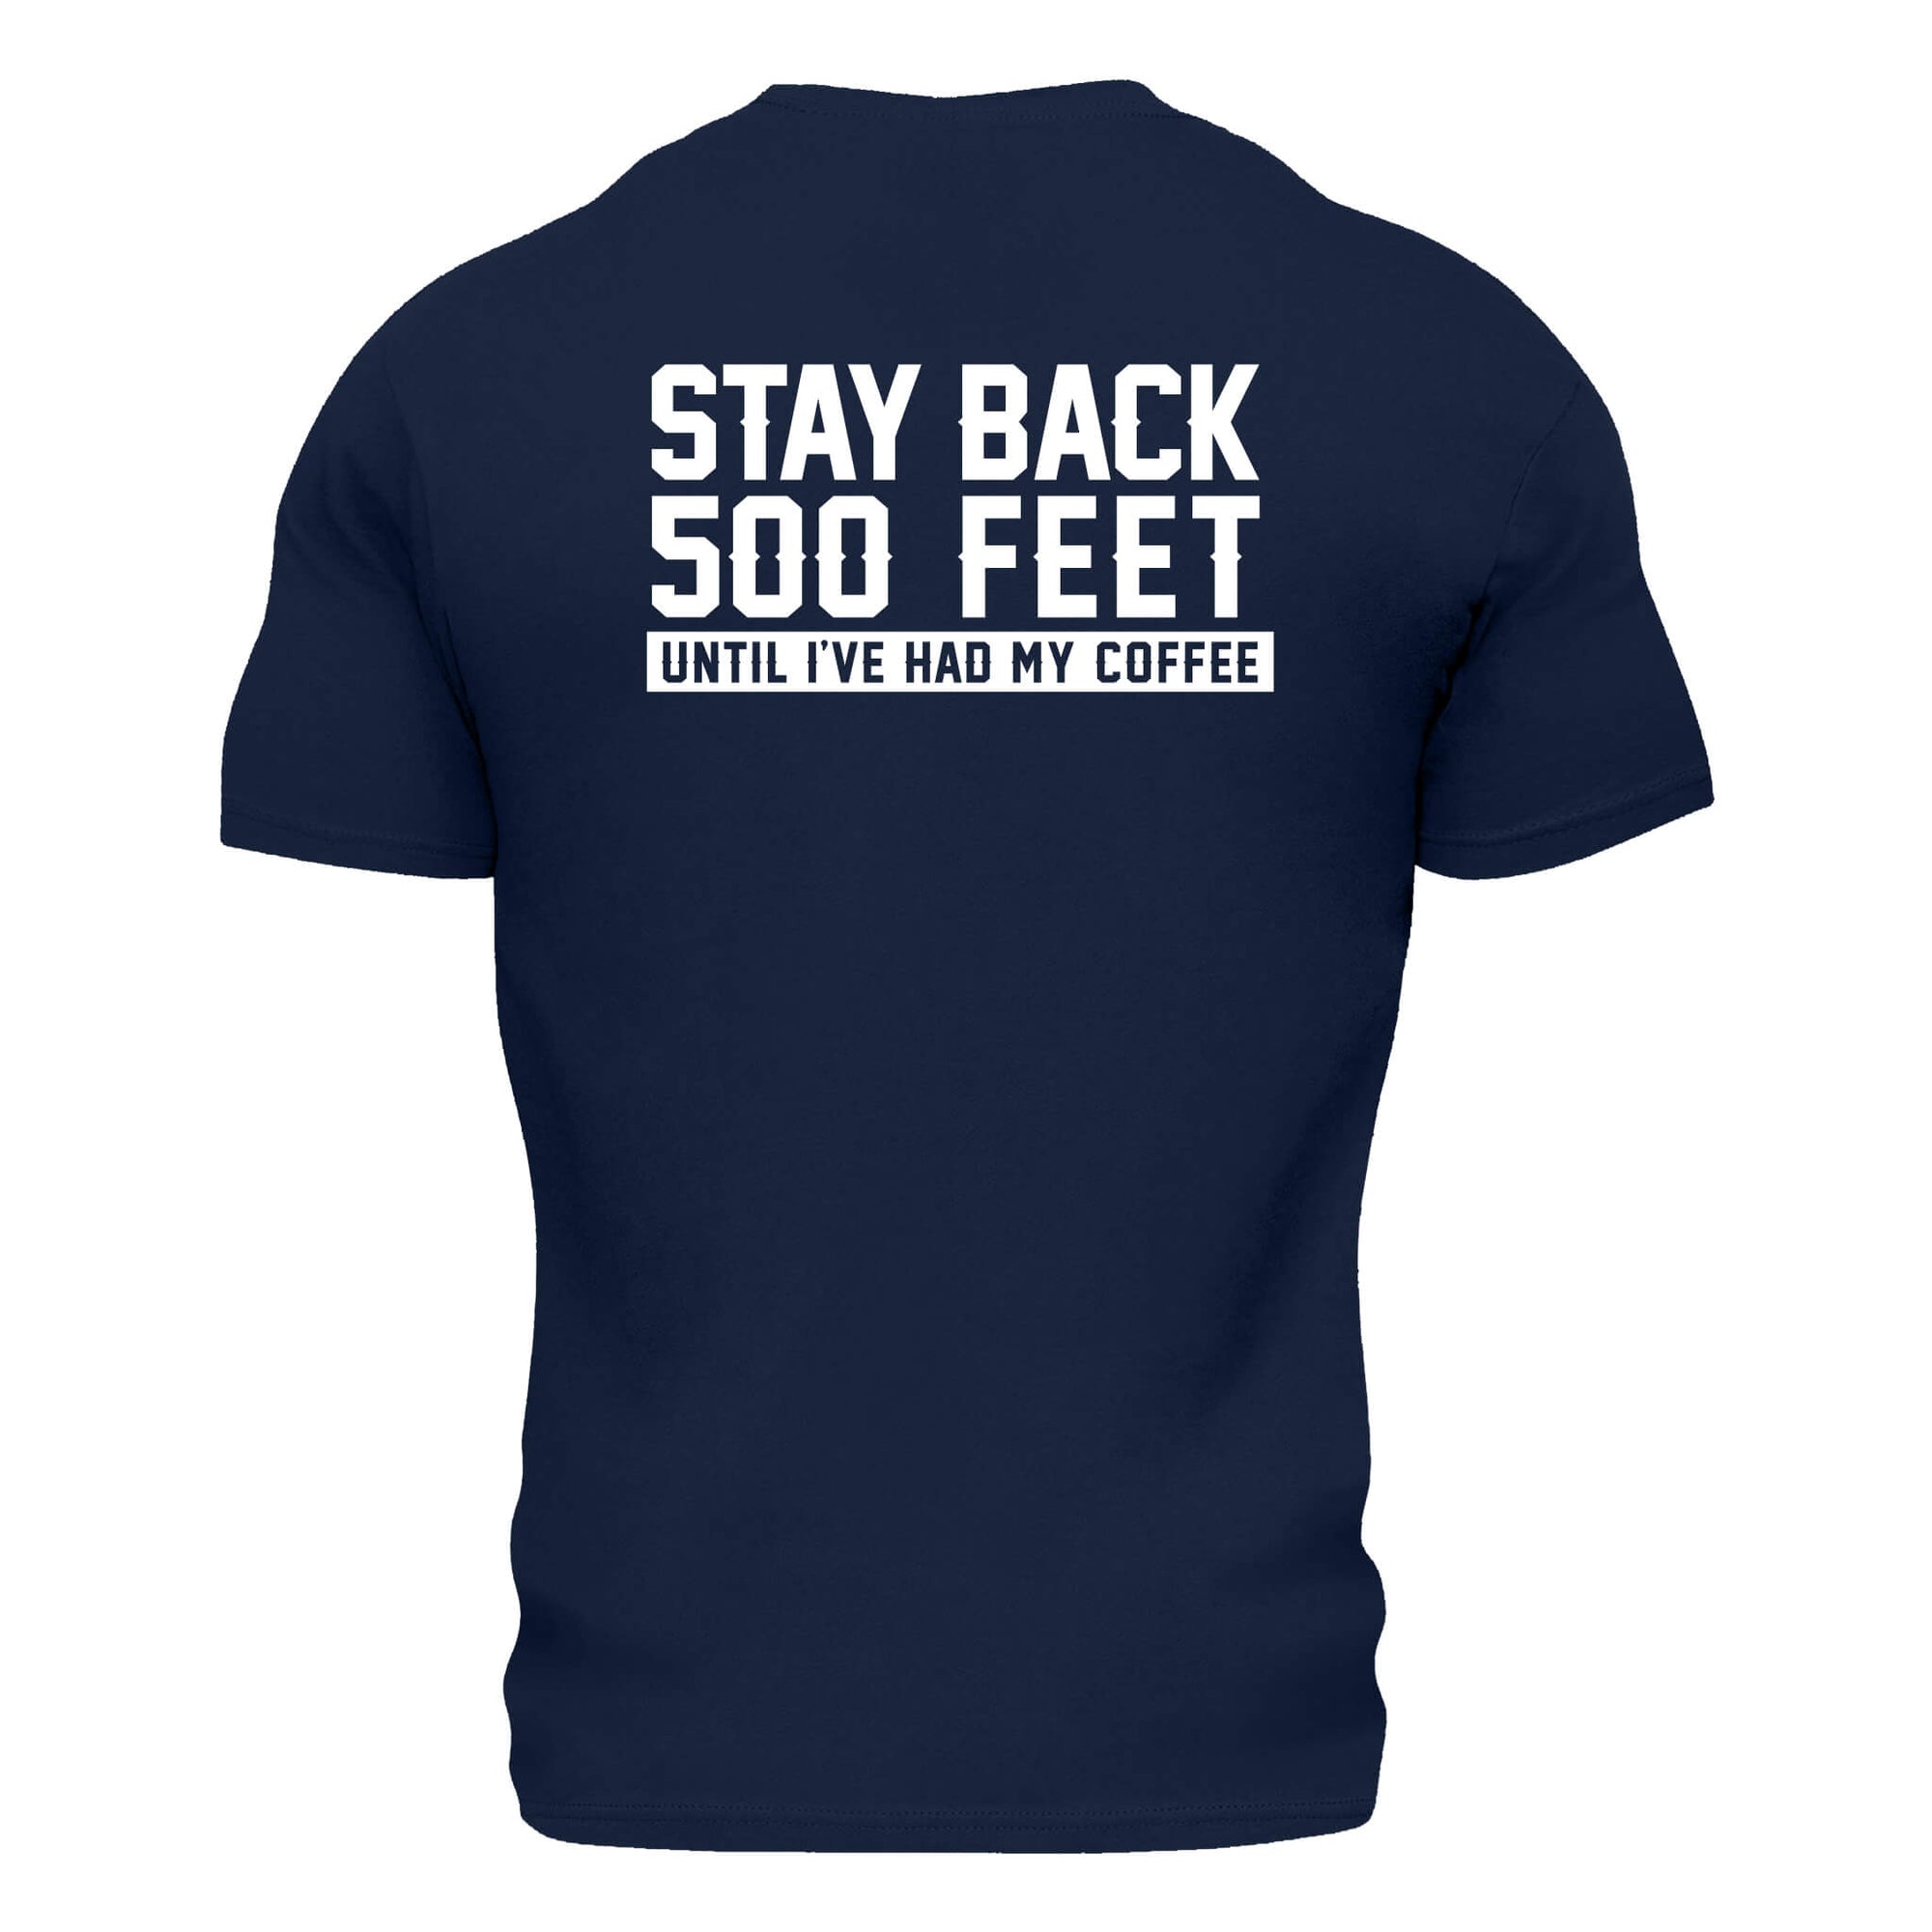 Back side of navy blue t shirt with large white lettering that reads "Stay back 500 feet until I've had my coffee" across the top